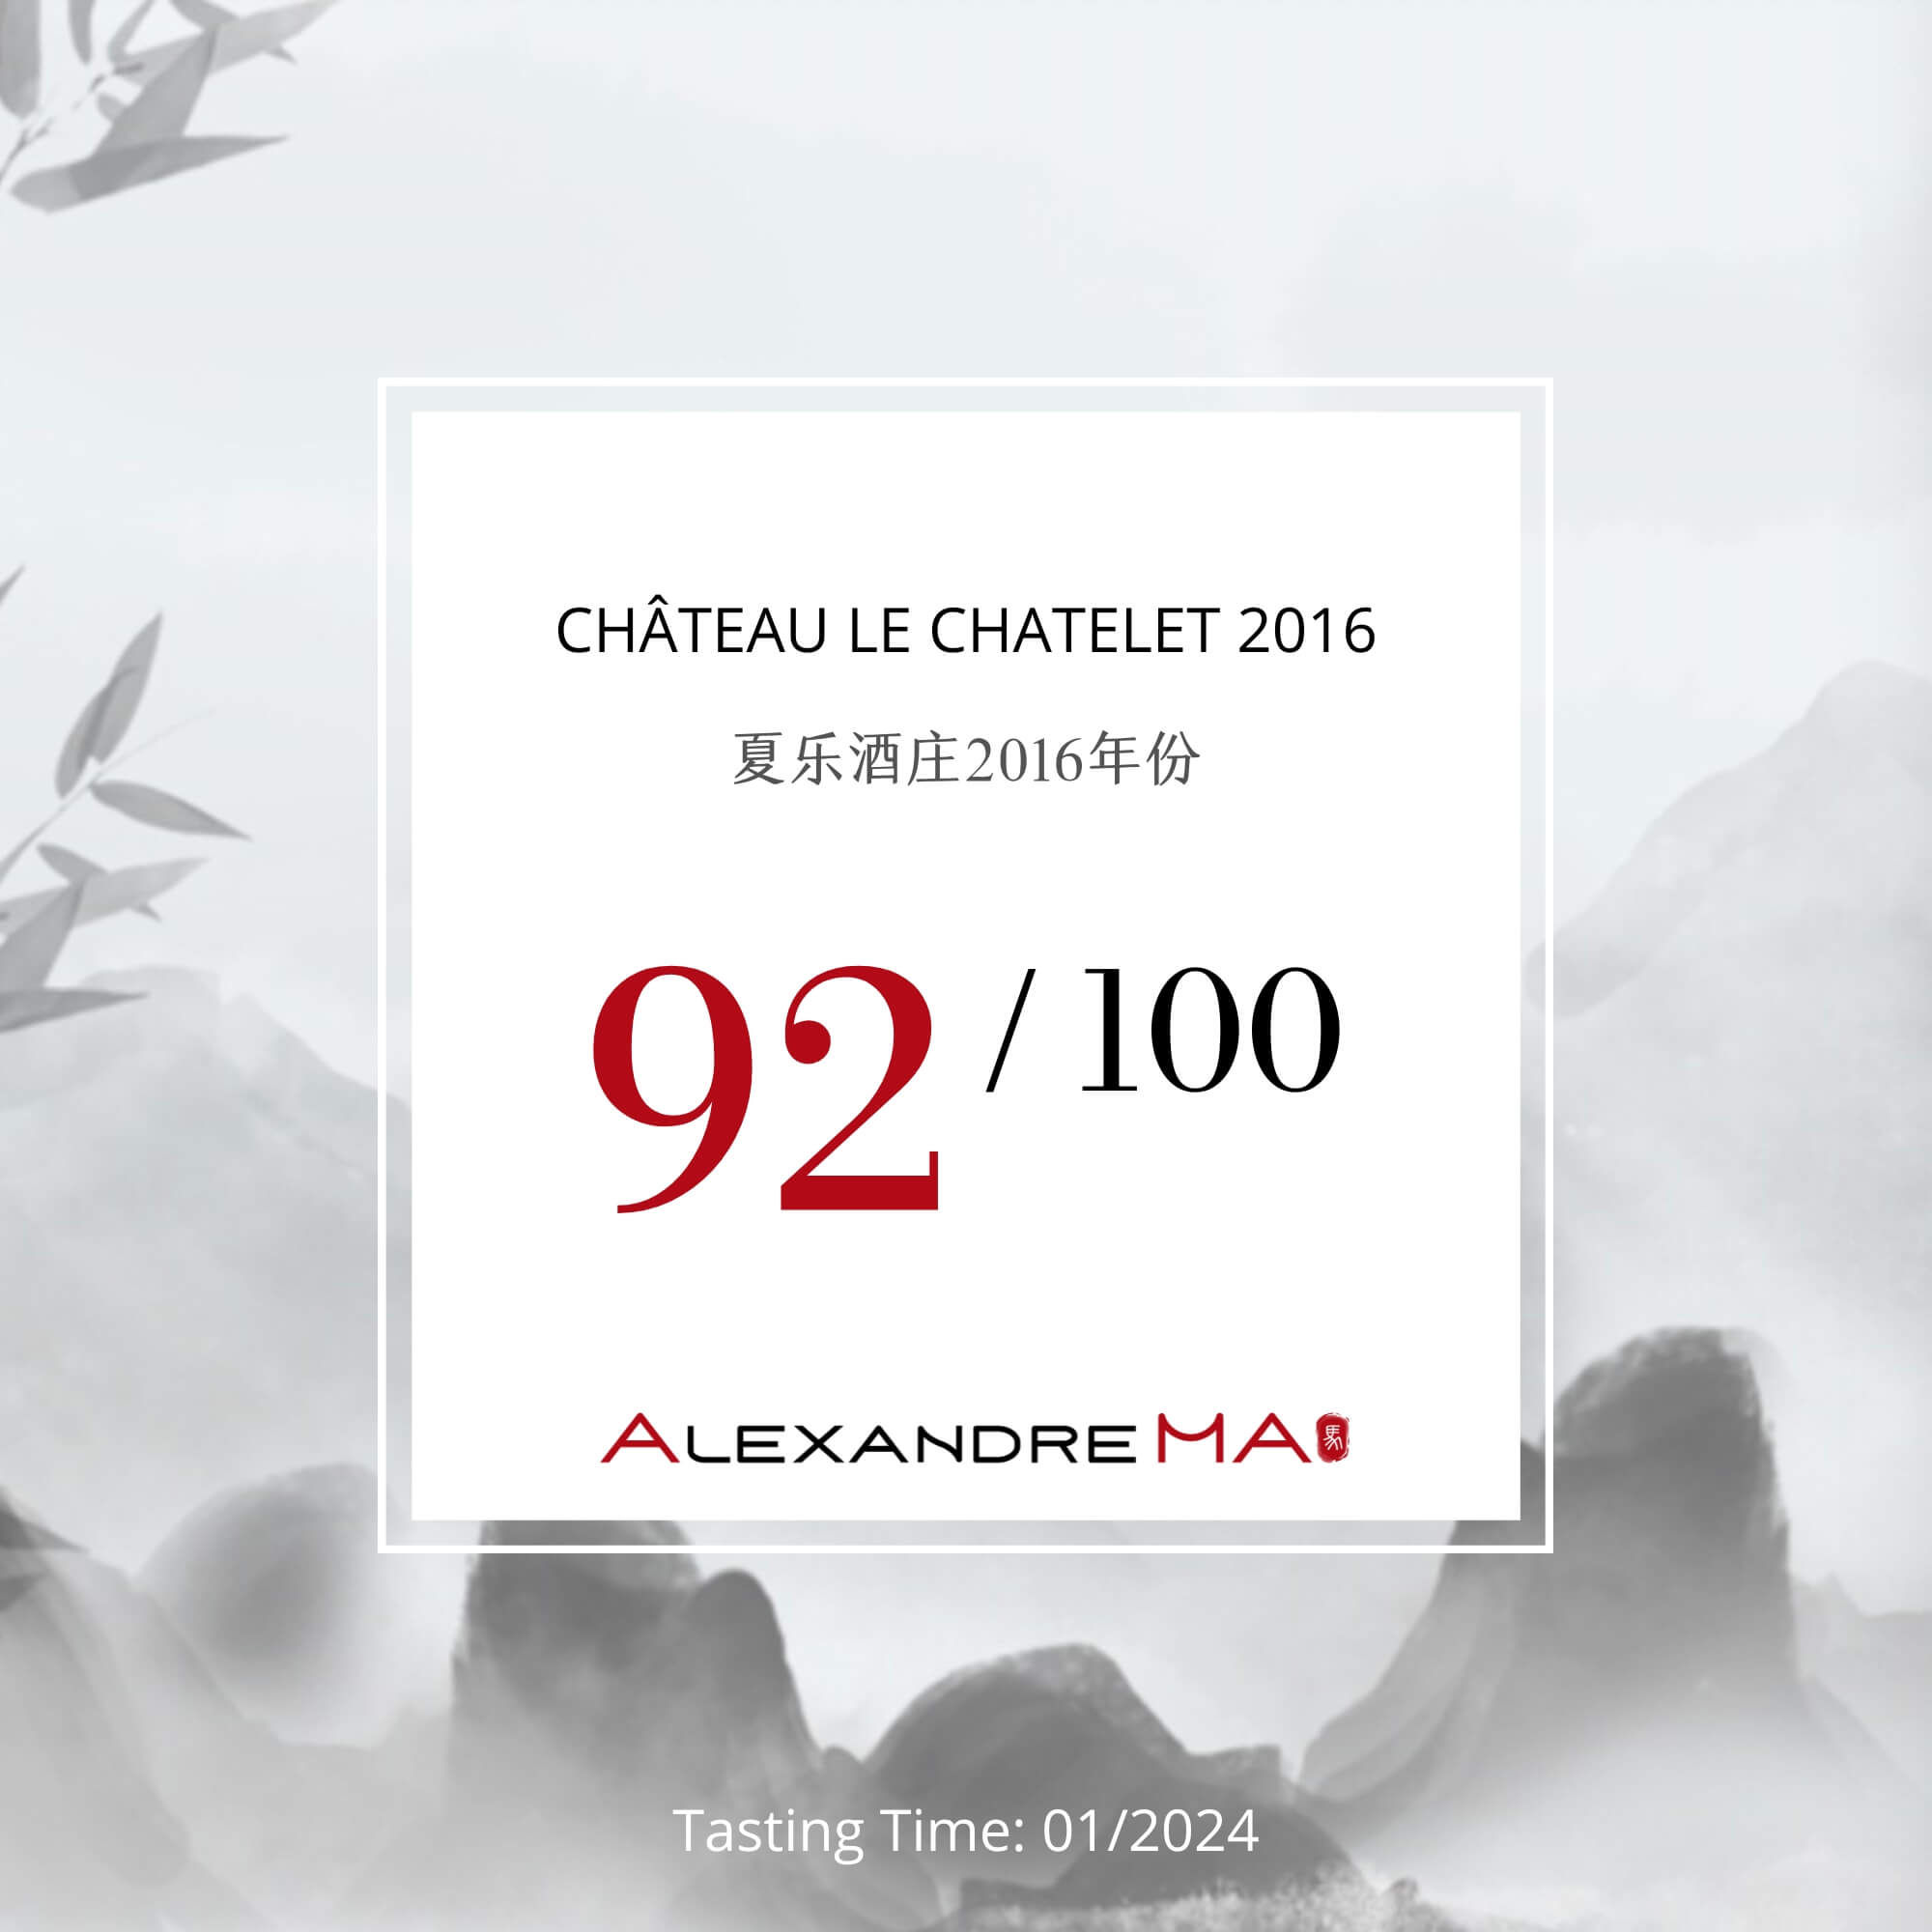 Château Le Chatelet 2016-夏乐酒庄 - Alexandre Ma